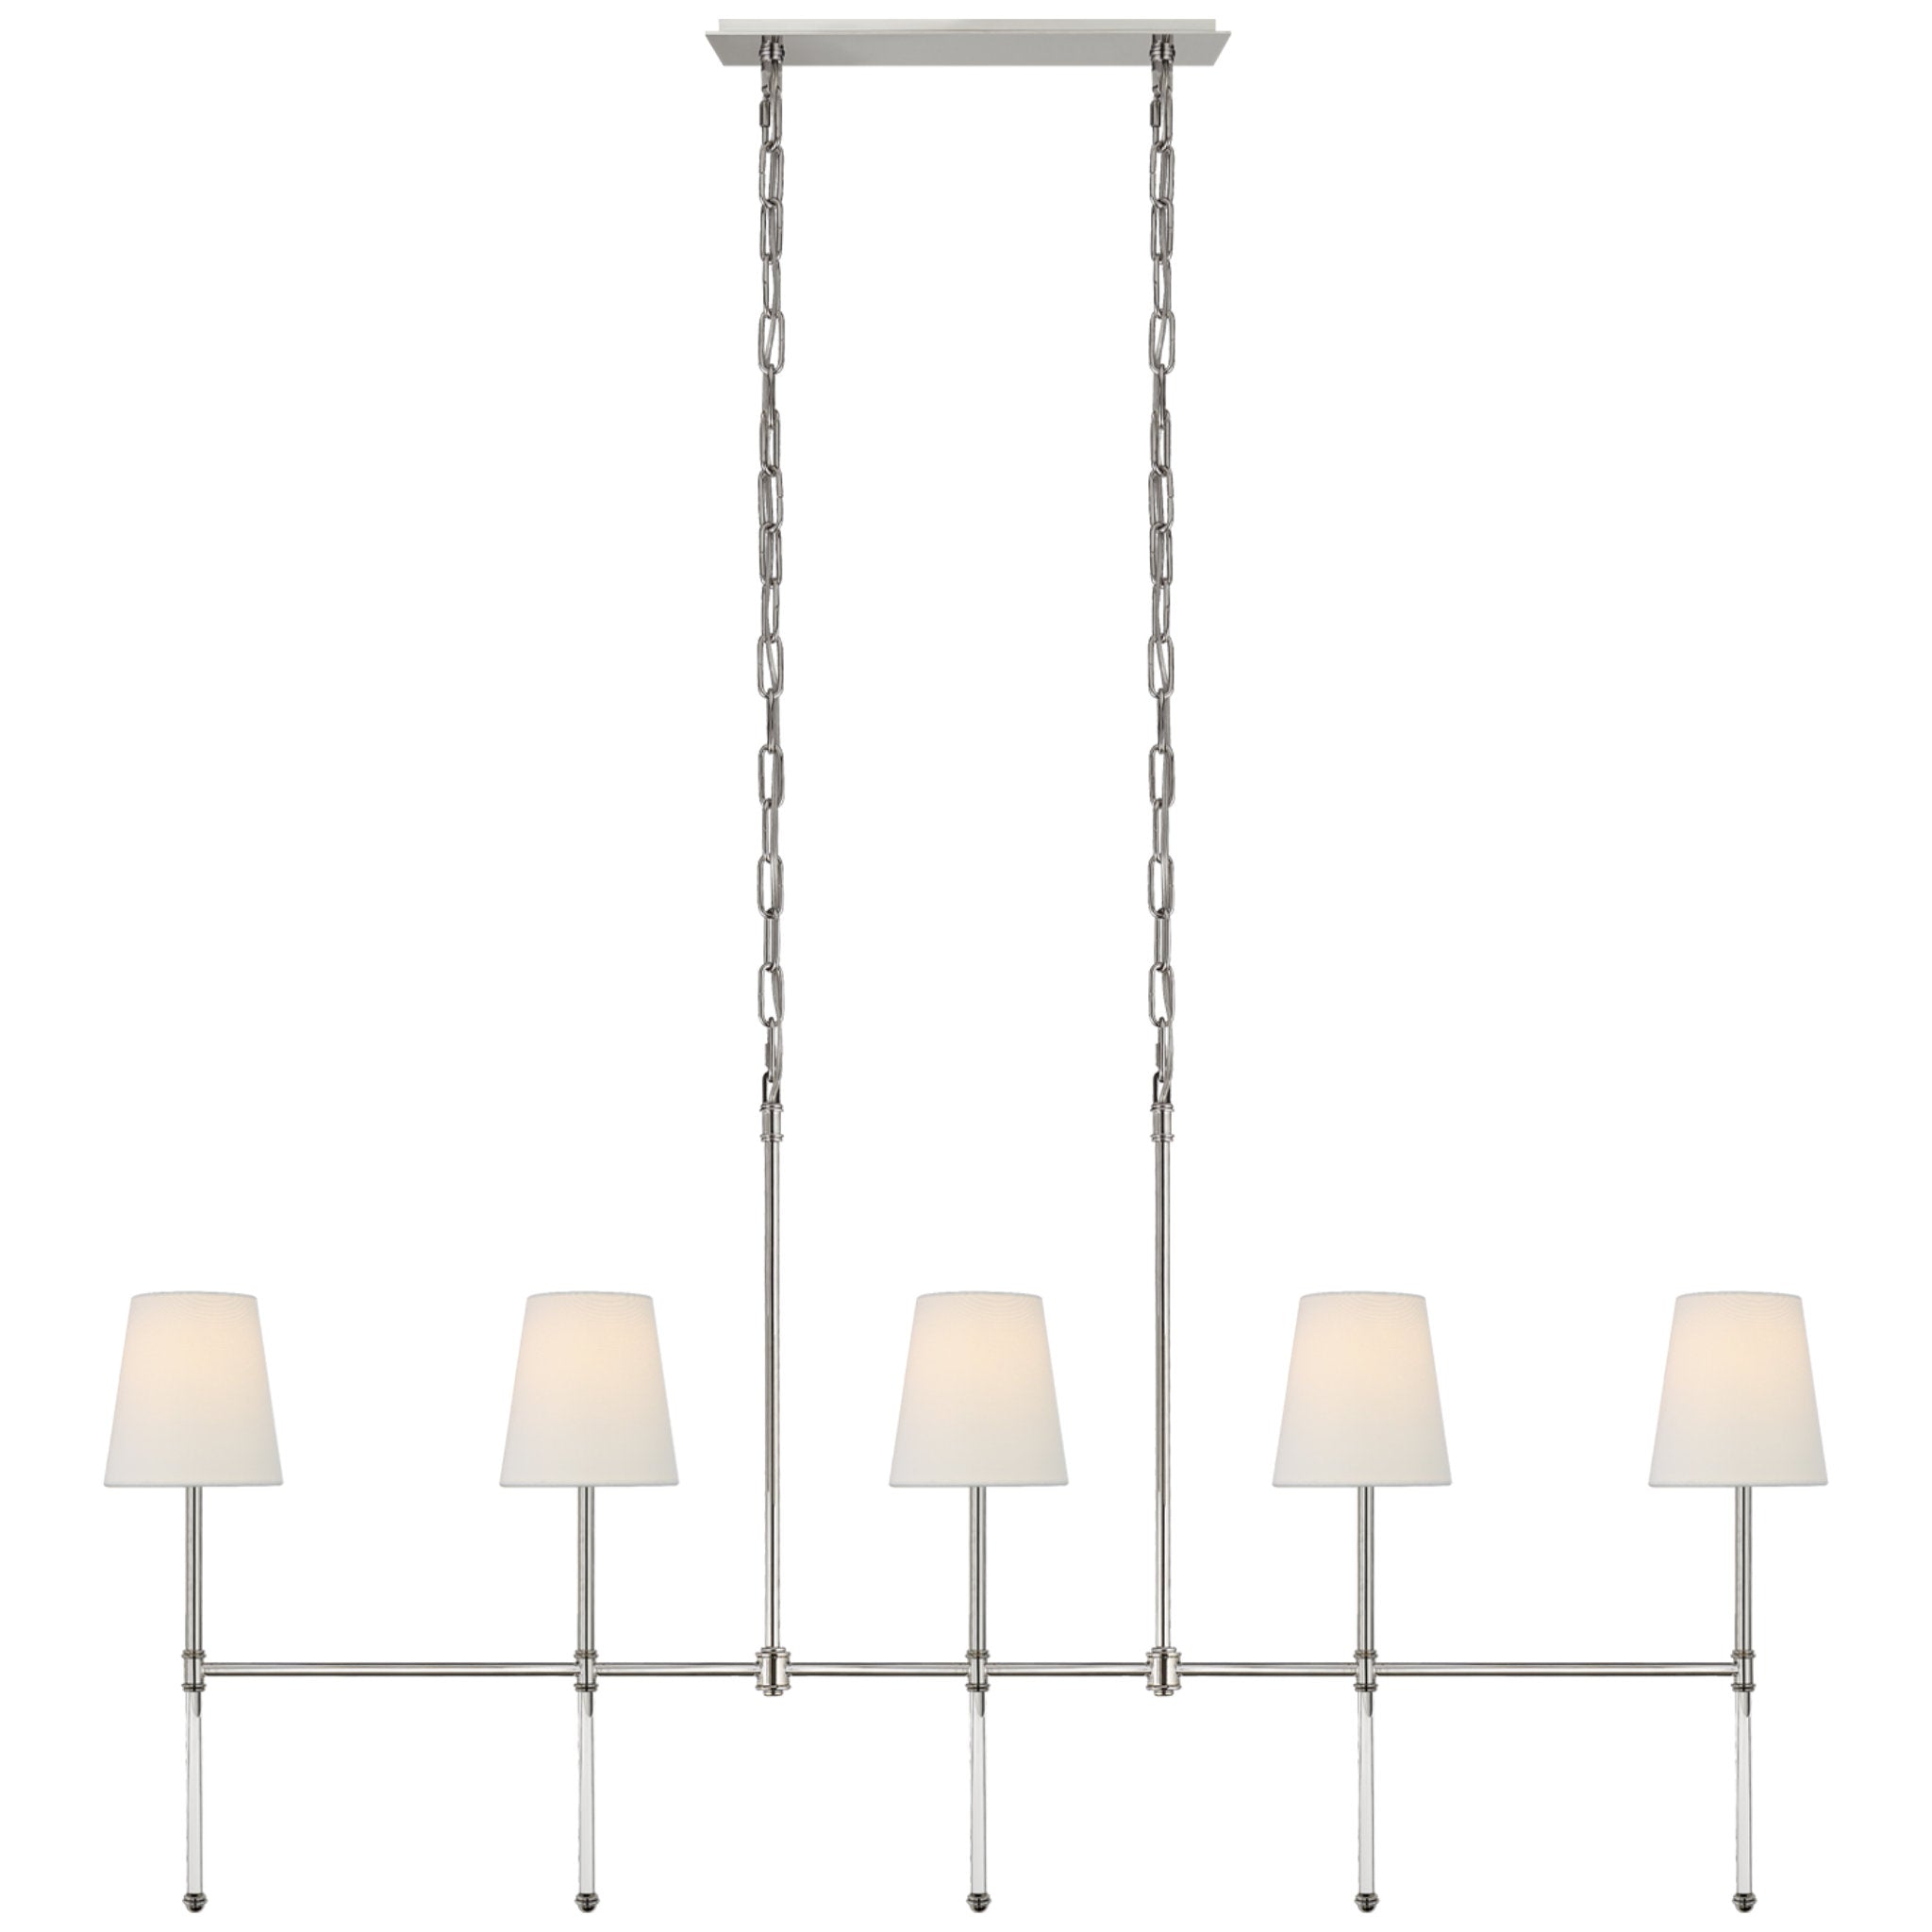 Suzanne Kasler Camille Medium Linear Chandelier in Polished Nickel with Linen Shades